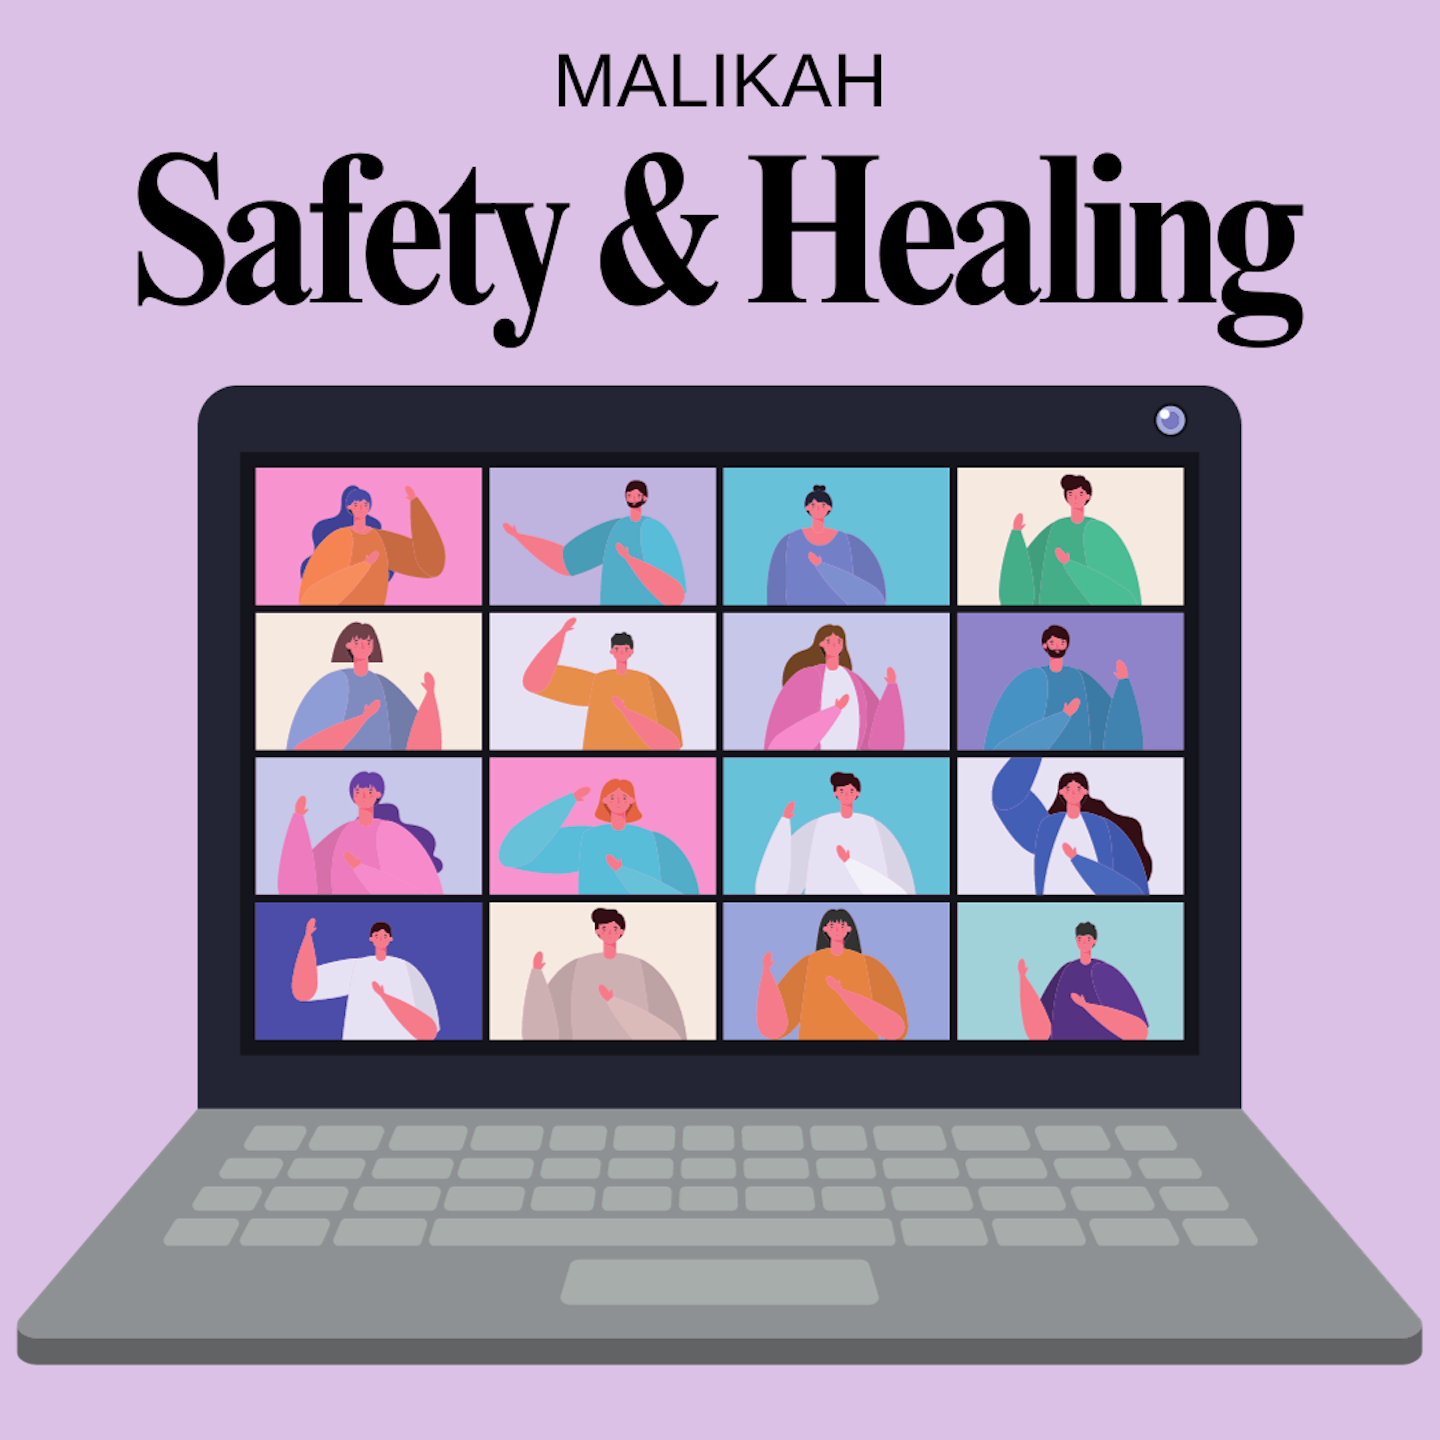 Safety & Healing for muslim students (3).png